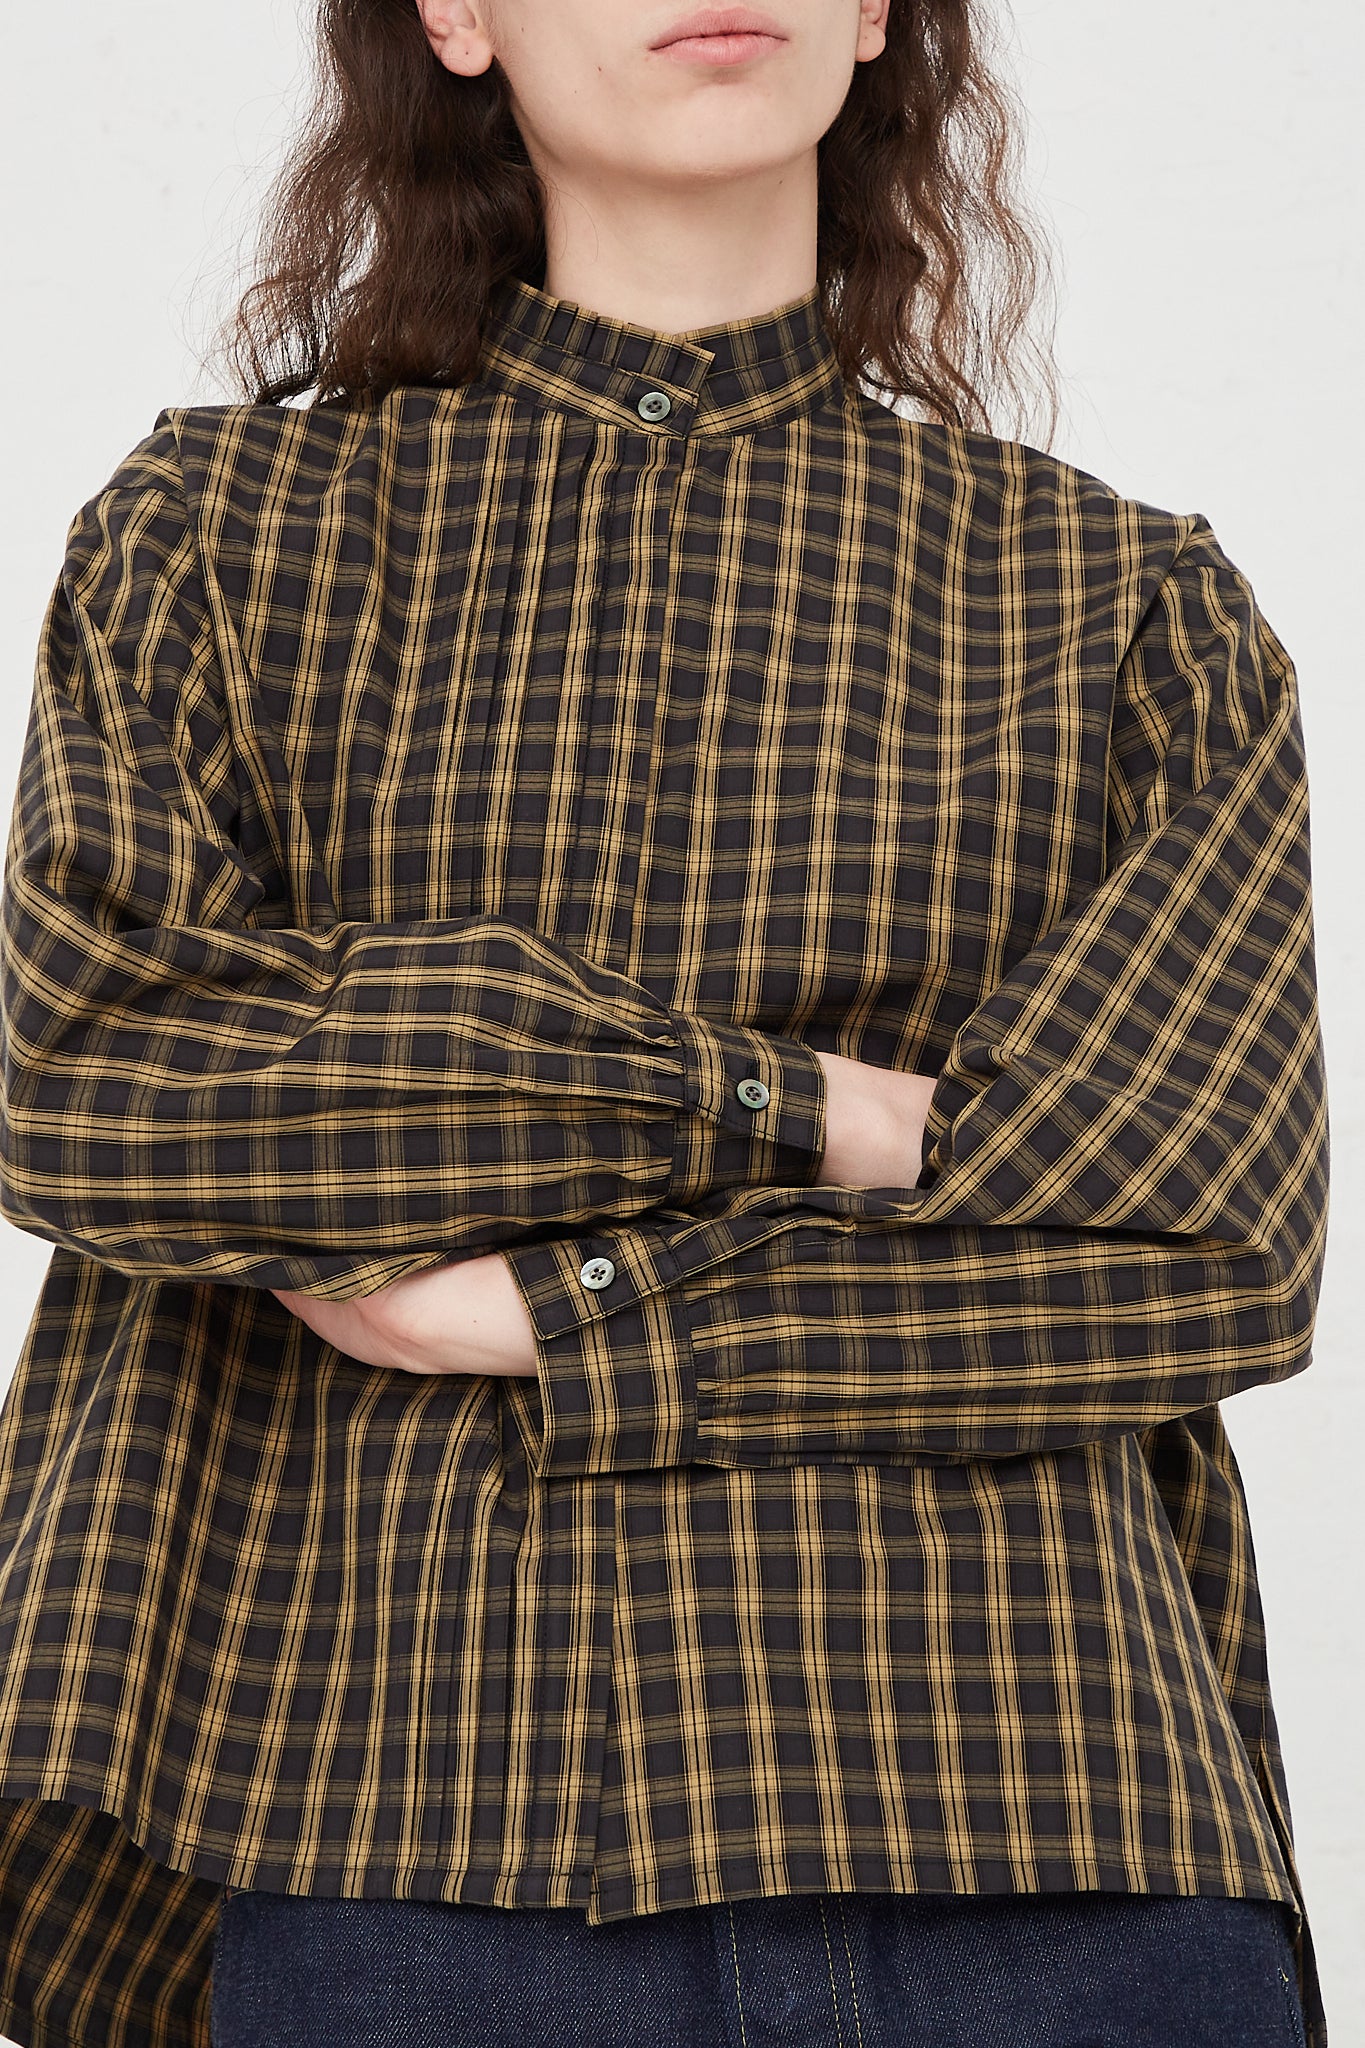 CHIMALA Pleated Stand Collar Shirt in Yellow Check - Oroboro Store | Front view and up close. Model's arms crossed.